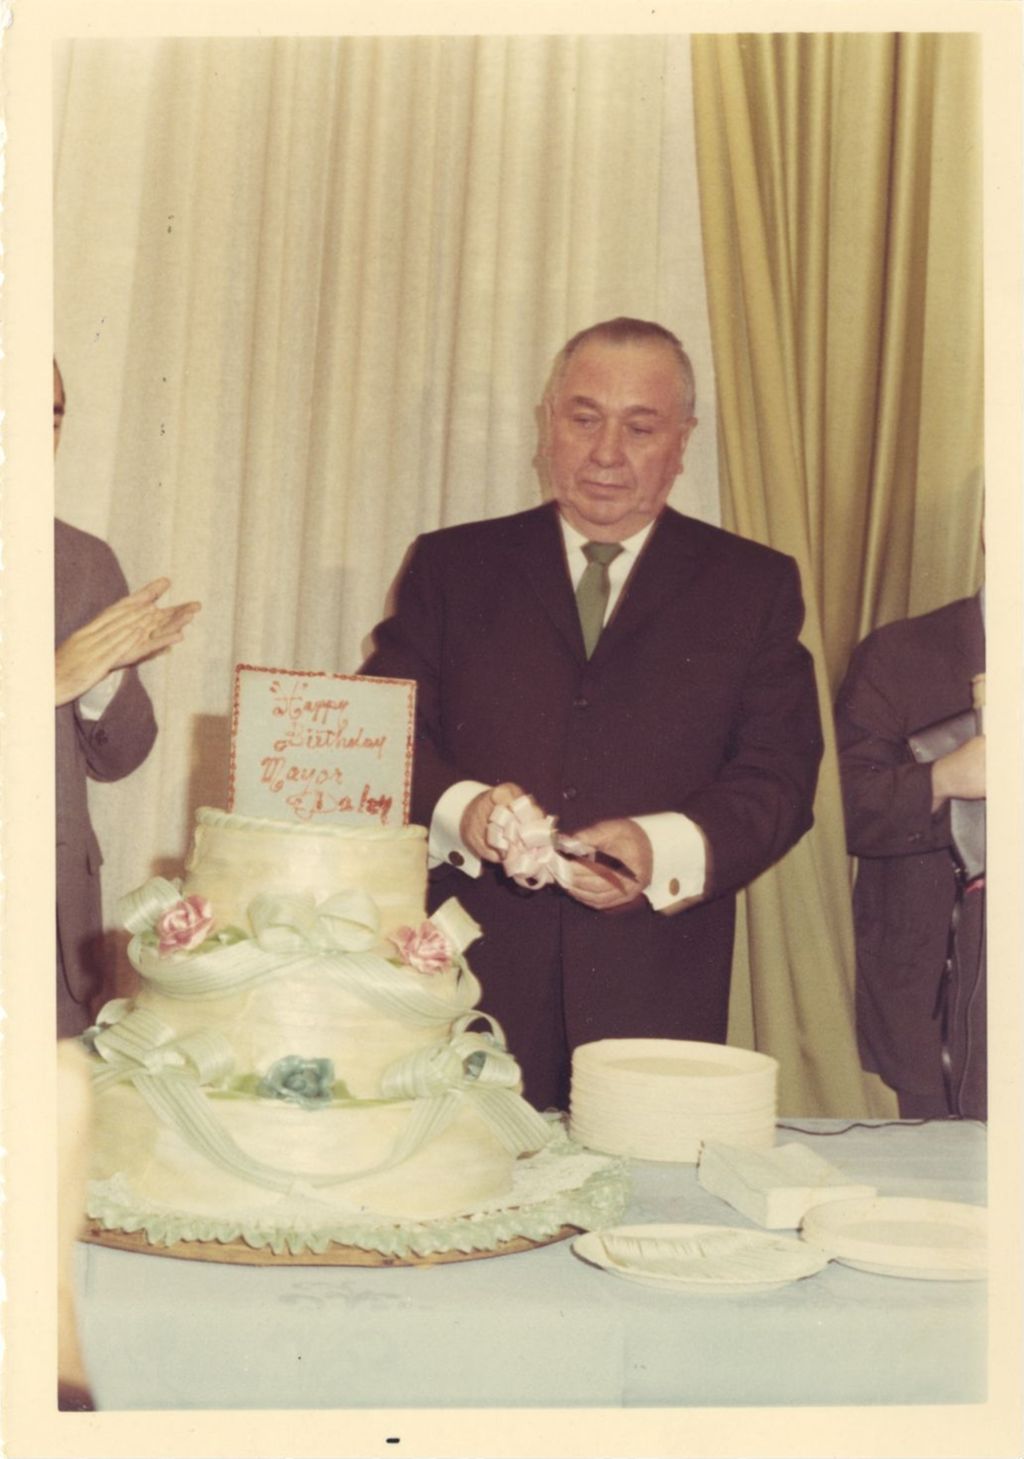 Miniature of Richard J. Daley with his birthday cake